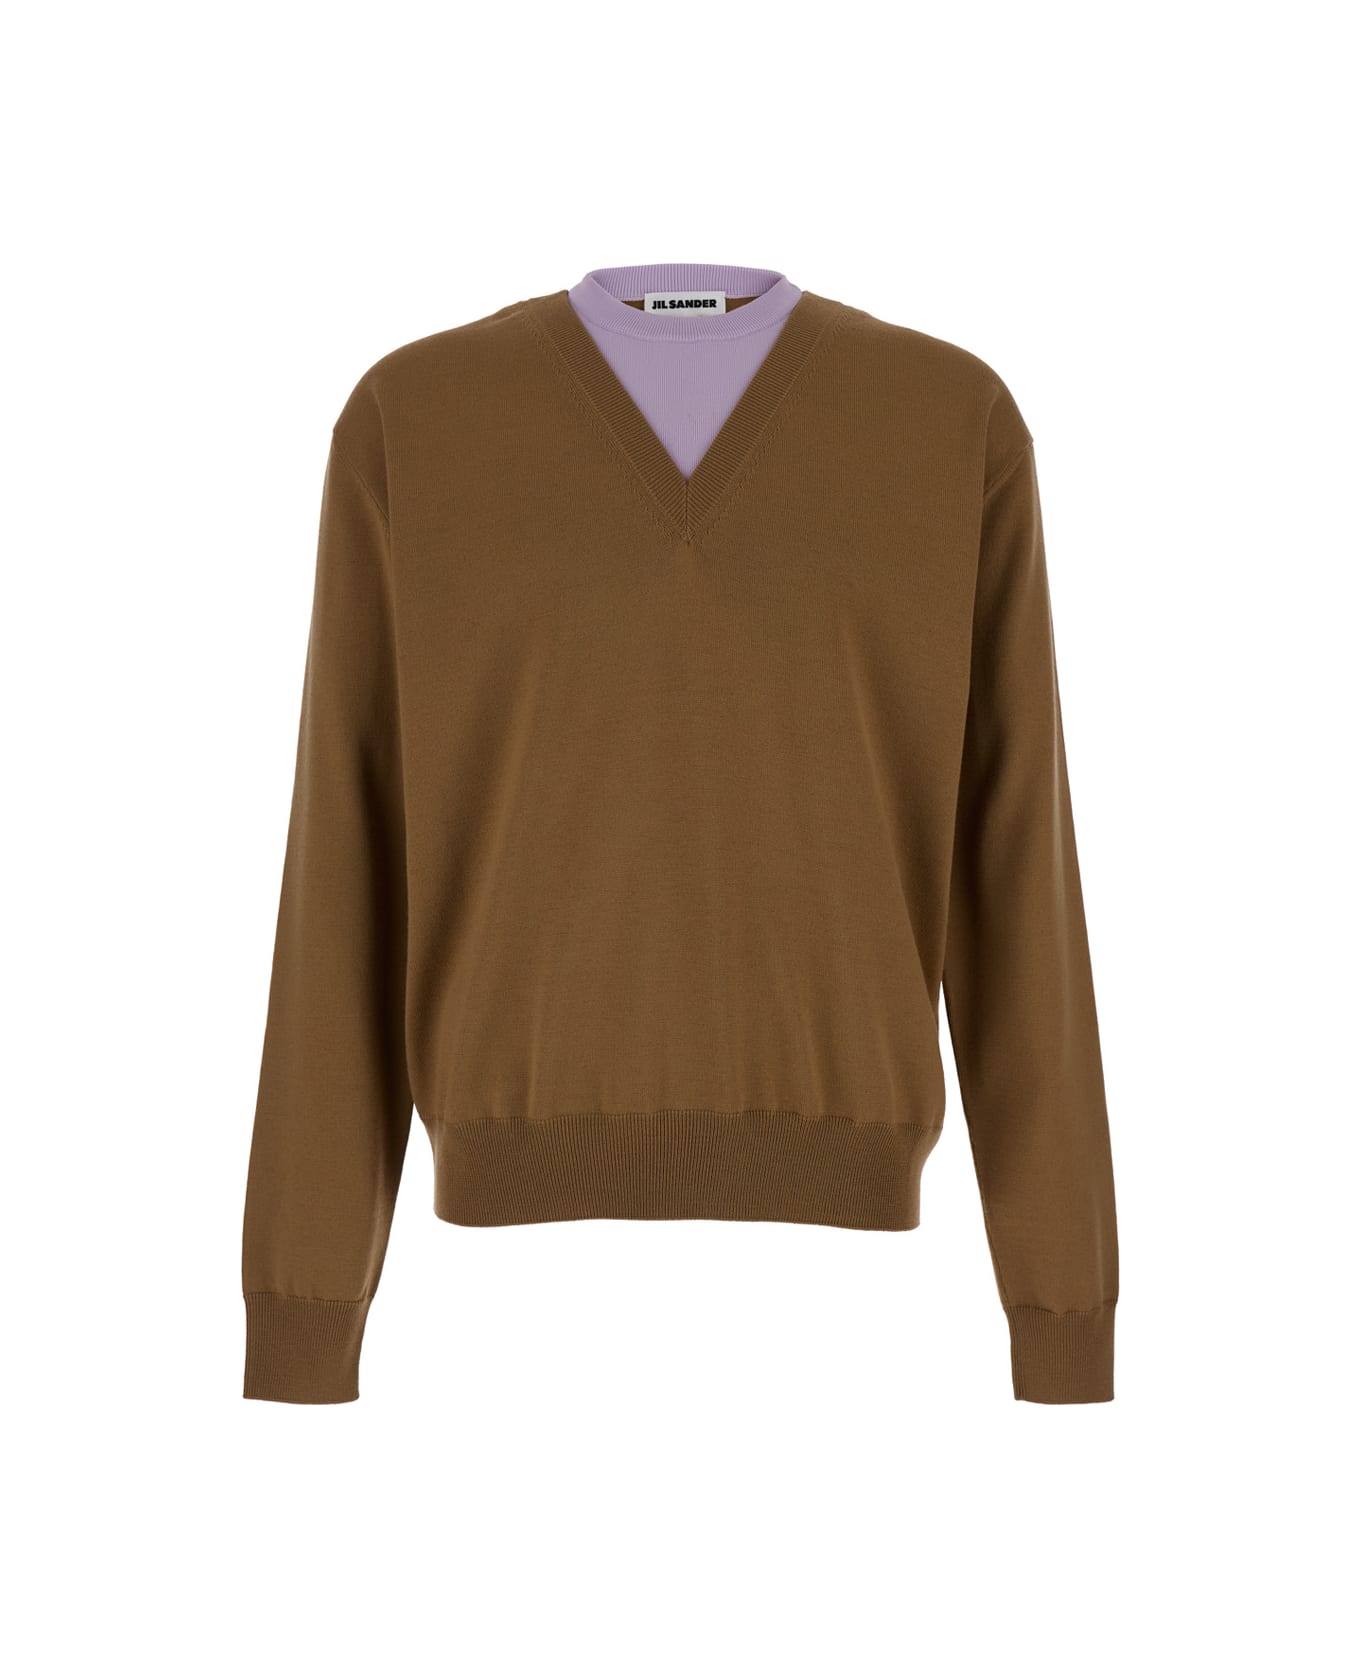 Jil Sander Brown And Lillac Double-neck Sweater In Wool Man - Brown